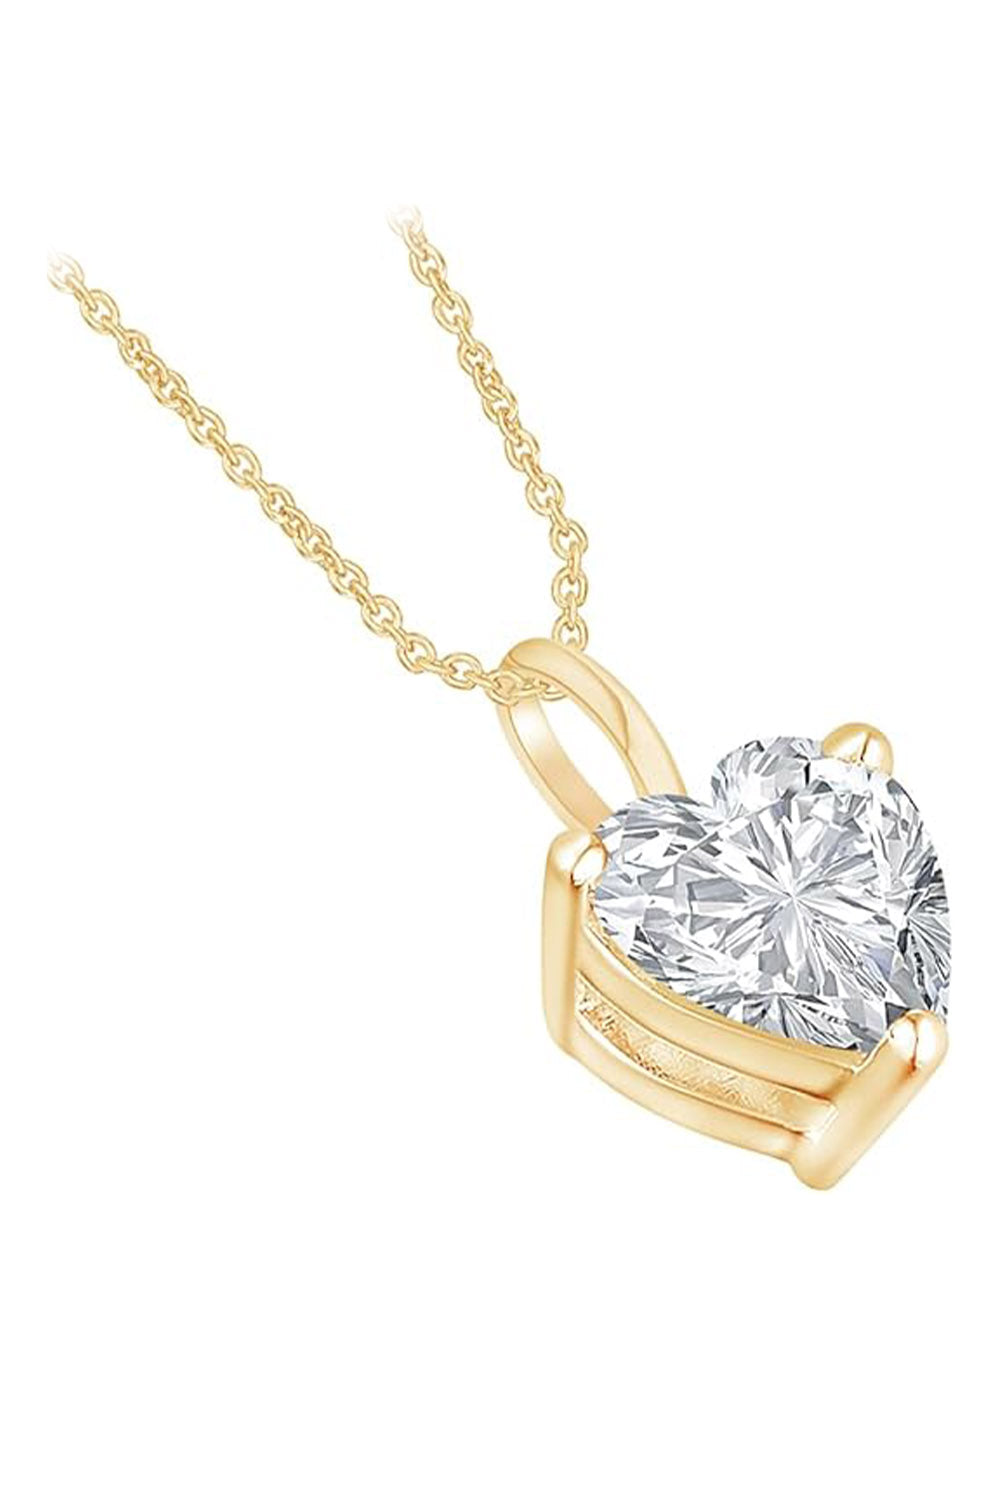 1 Carat Love Heart Moissanite Diamond Pendant Necklace in 18K Gold Plated Sterling Silver.